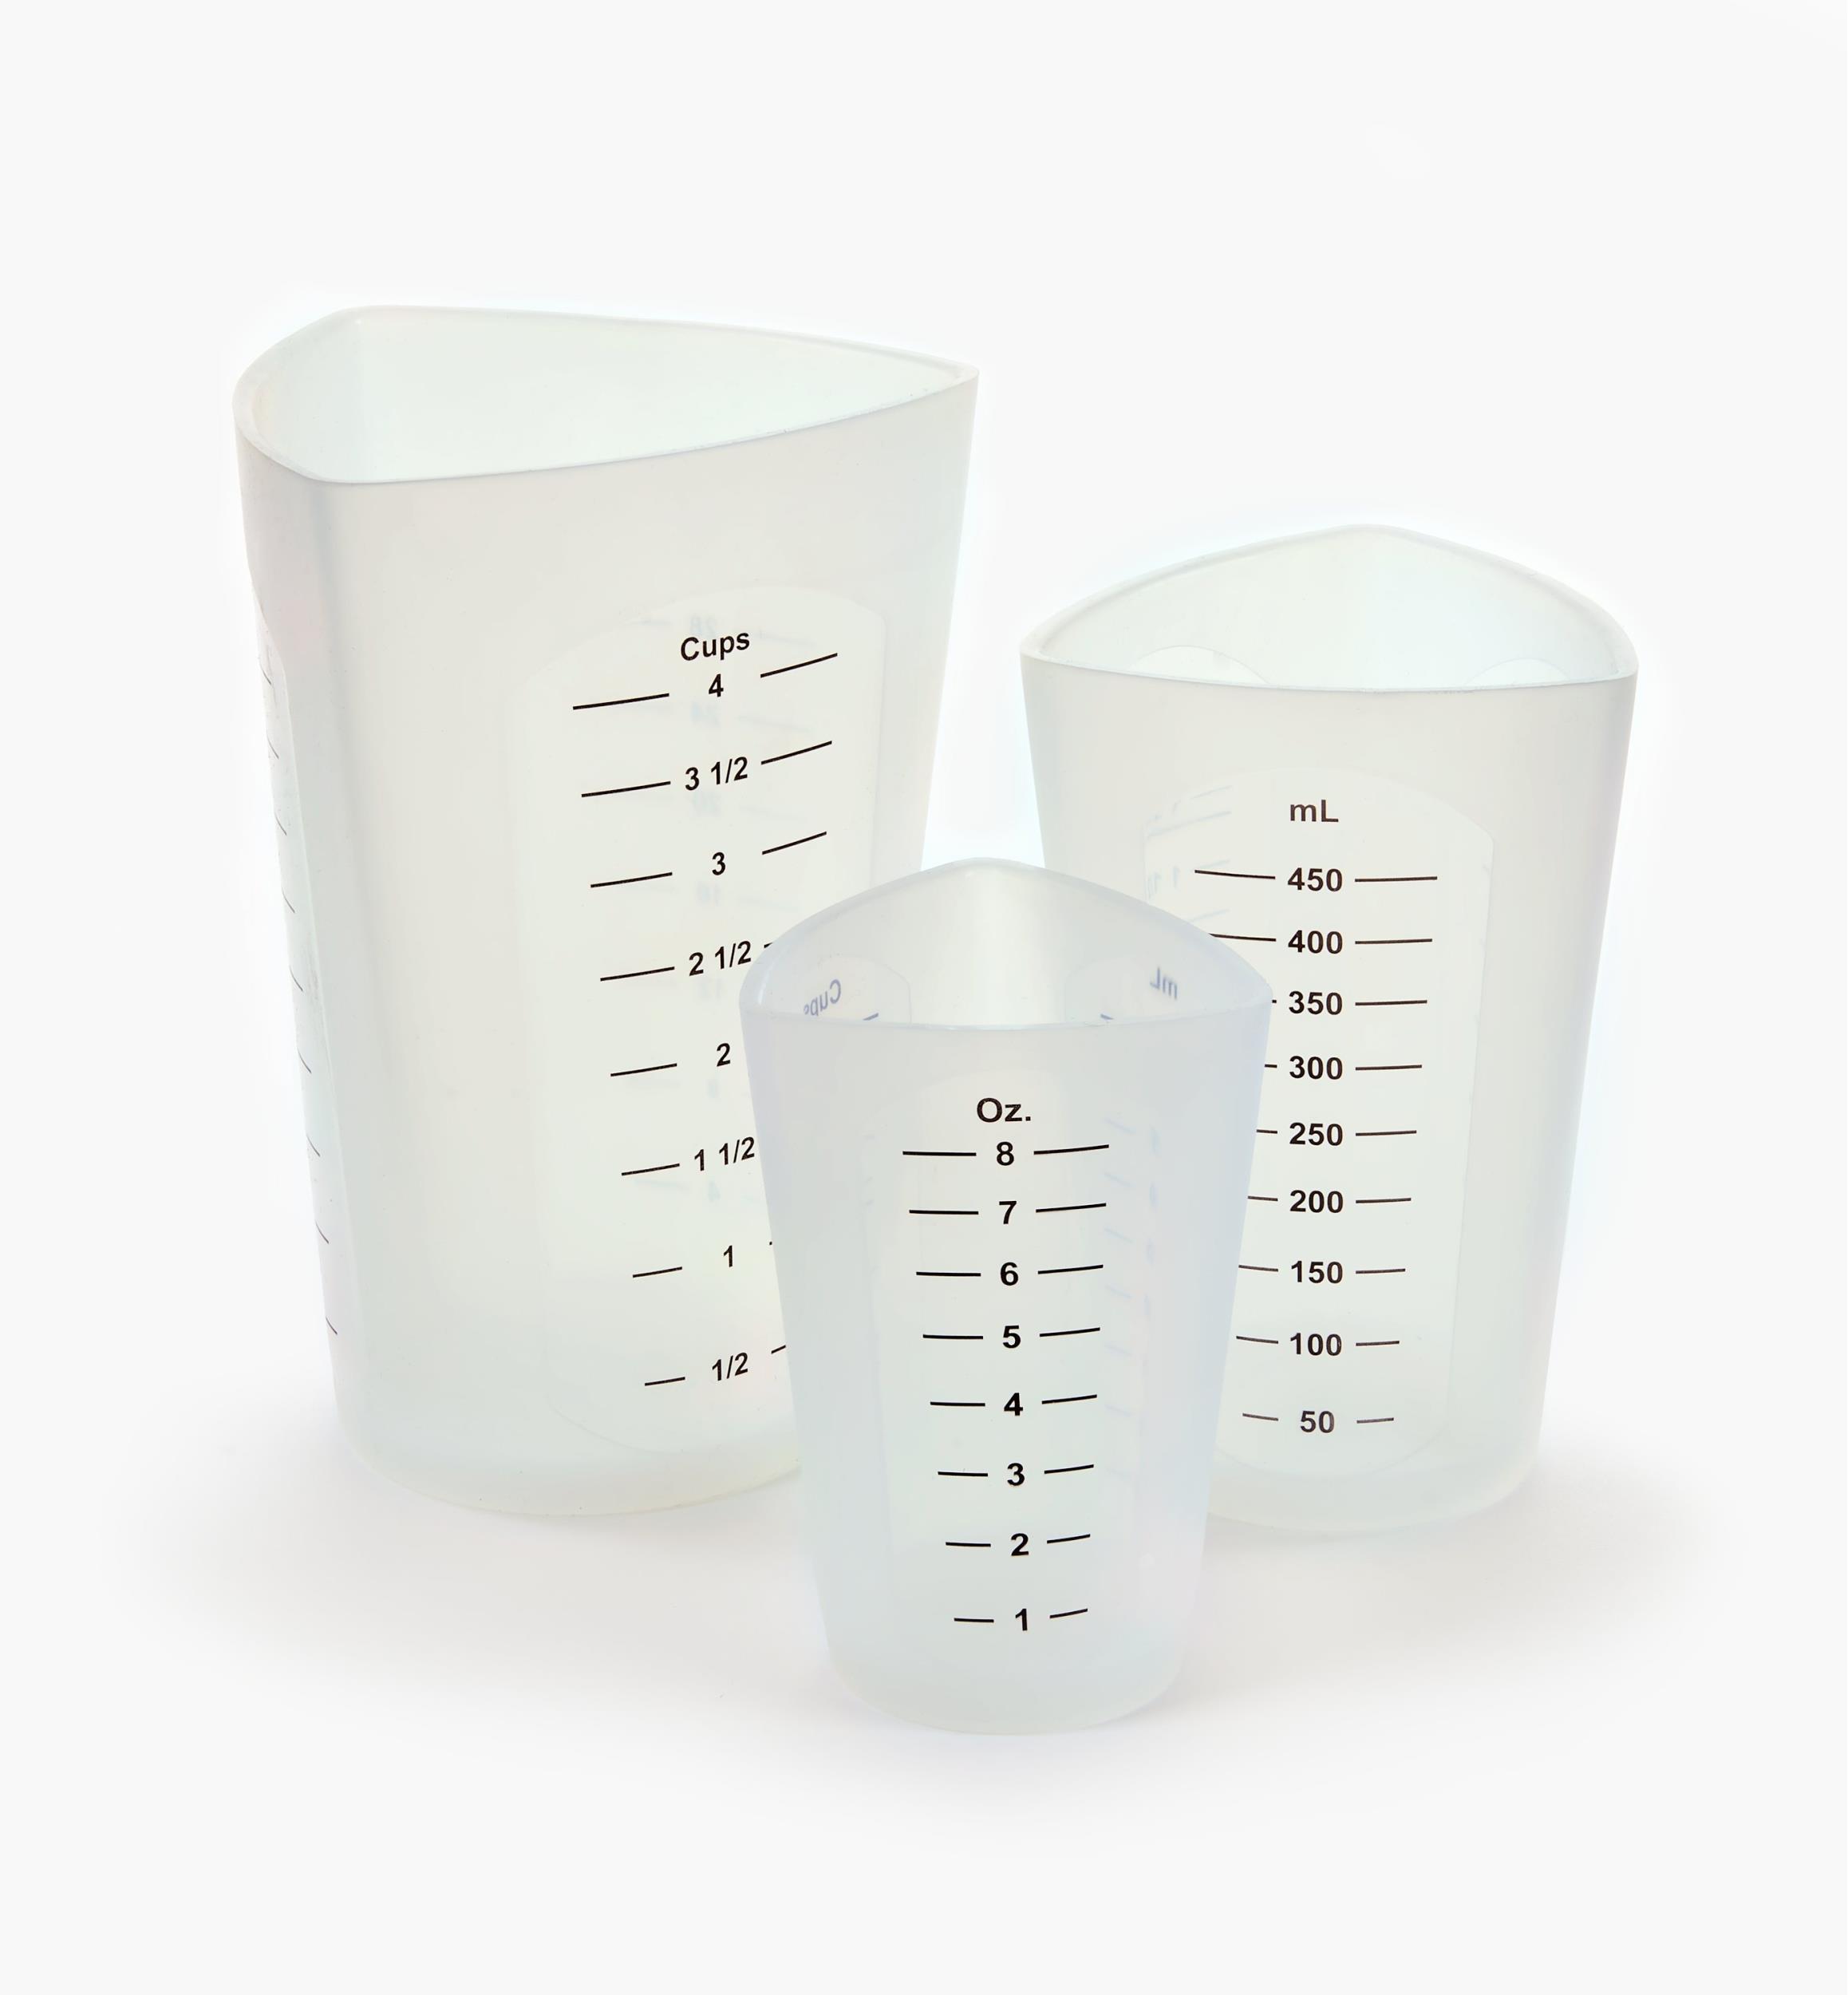 https://assets.leevalley.com/Size5/10107/EV159-flexible-silicone-measuring-cups-set-of-3-f-0001.jpg